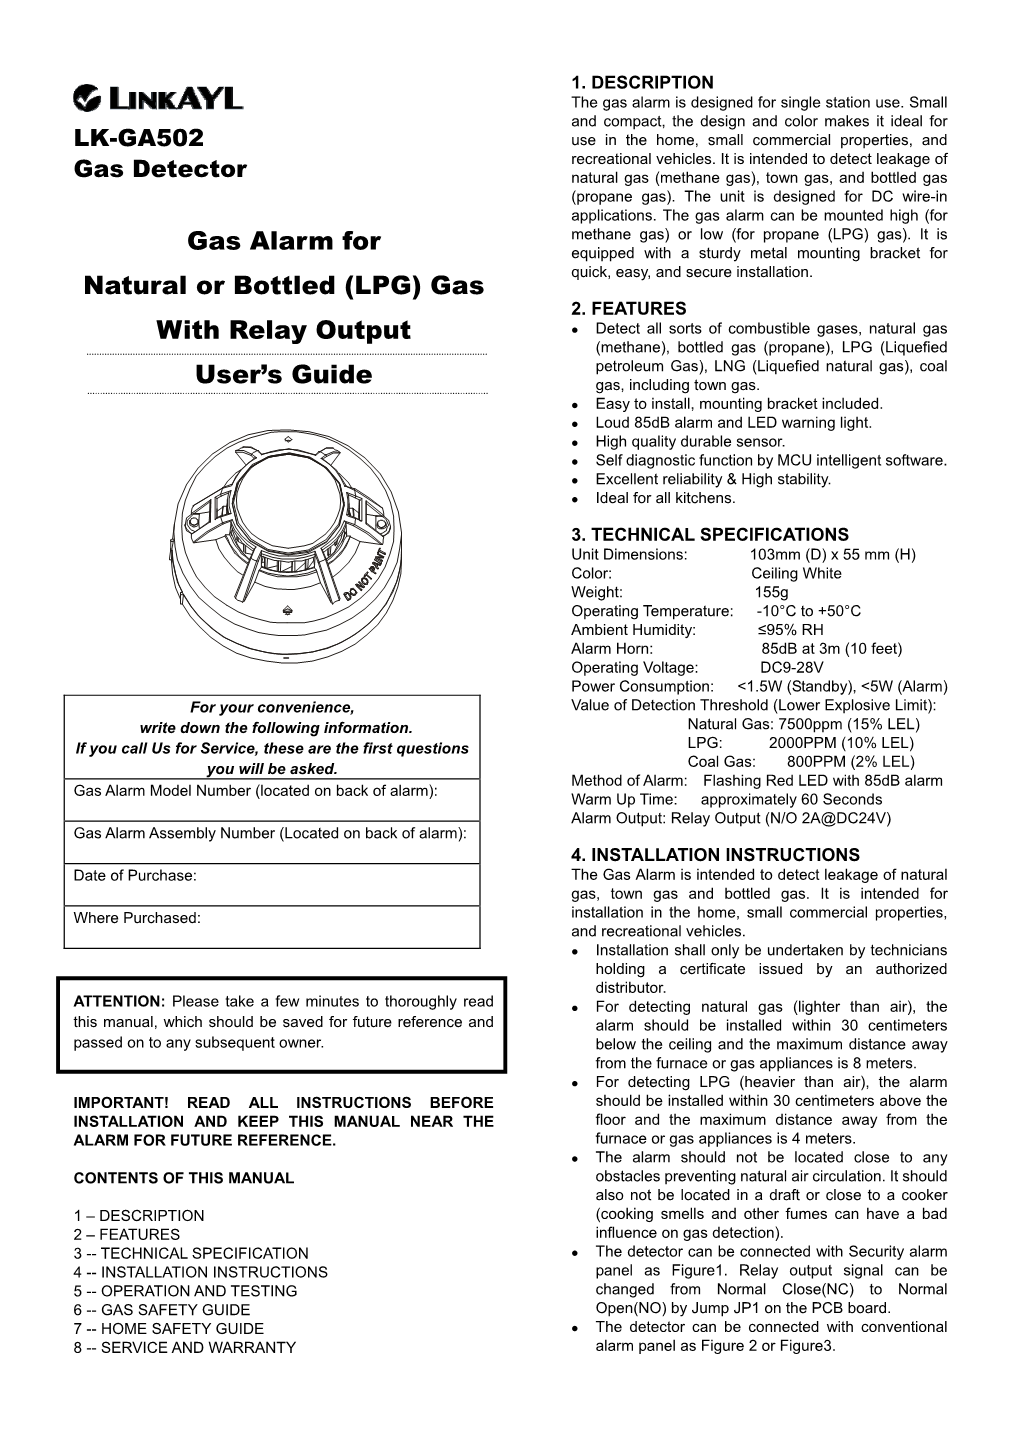 Gas Alarm for Natural Or Bottled (LPG) Gas with Relay Output User's